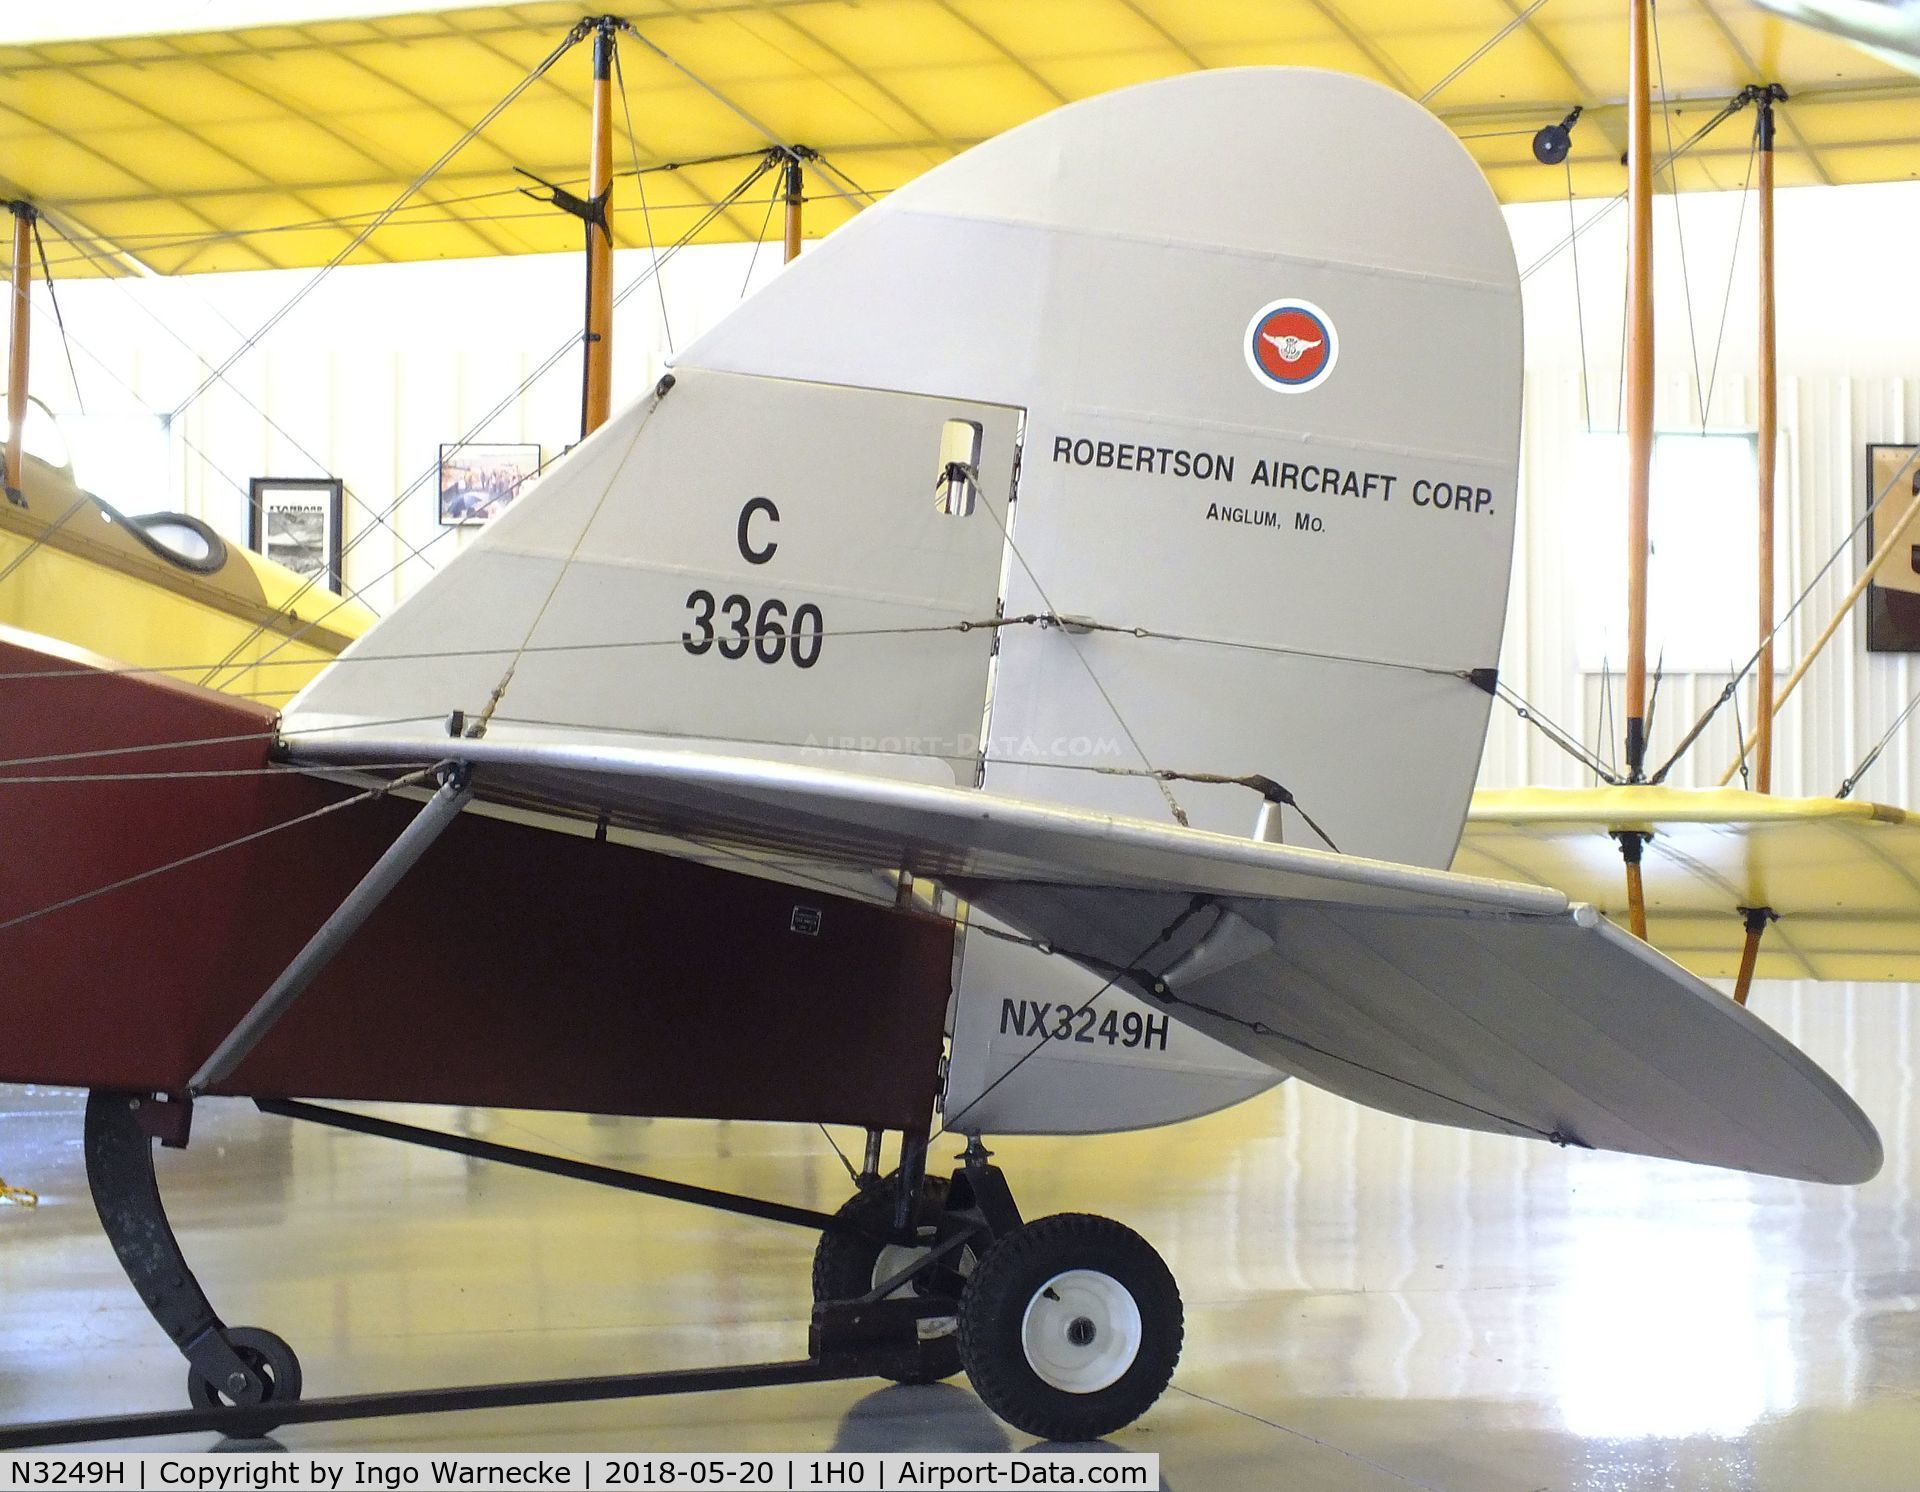 N3249H, 2006 Crawford J H DH-4M2A C/N 3, Airco / De Havilland D.H.4M2A, rebuilt by J.H. Crawford with a Ford-engine in 2006 at the Aircraft Restoration Museum at Creve Coeur airfield, Maryland Heights MO